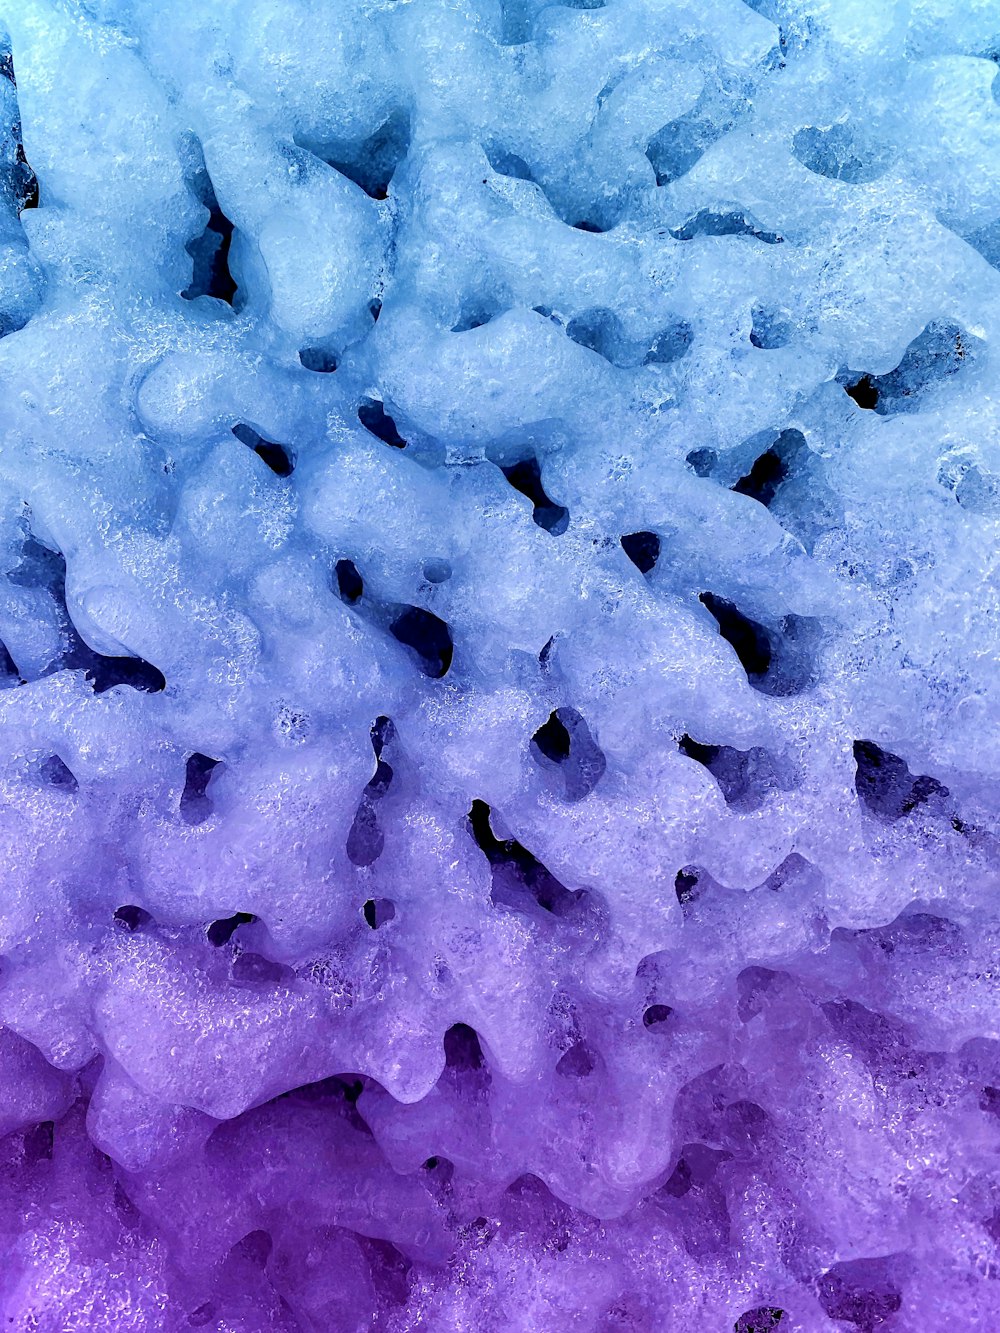 a close up of a purple and blue substance